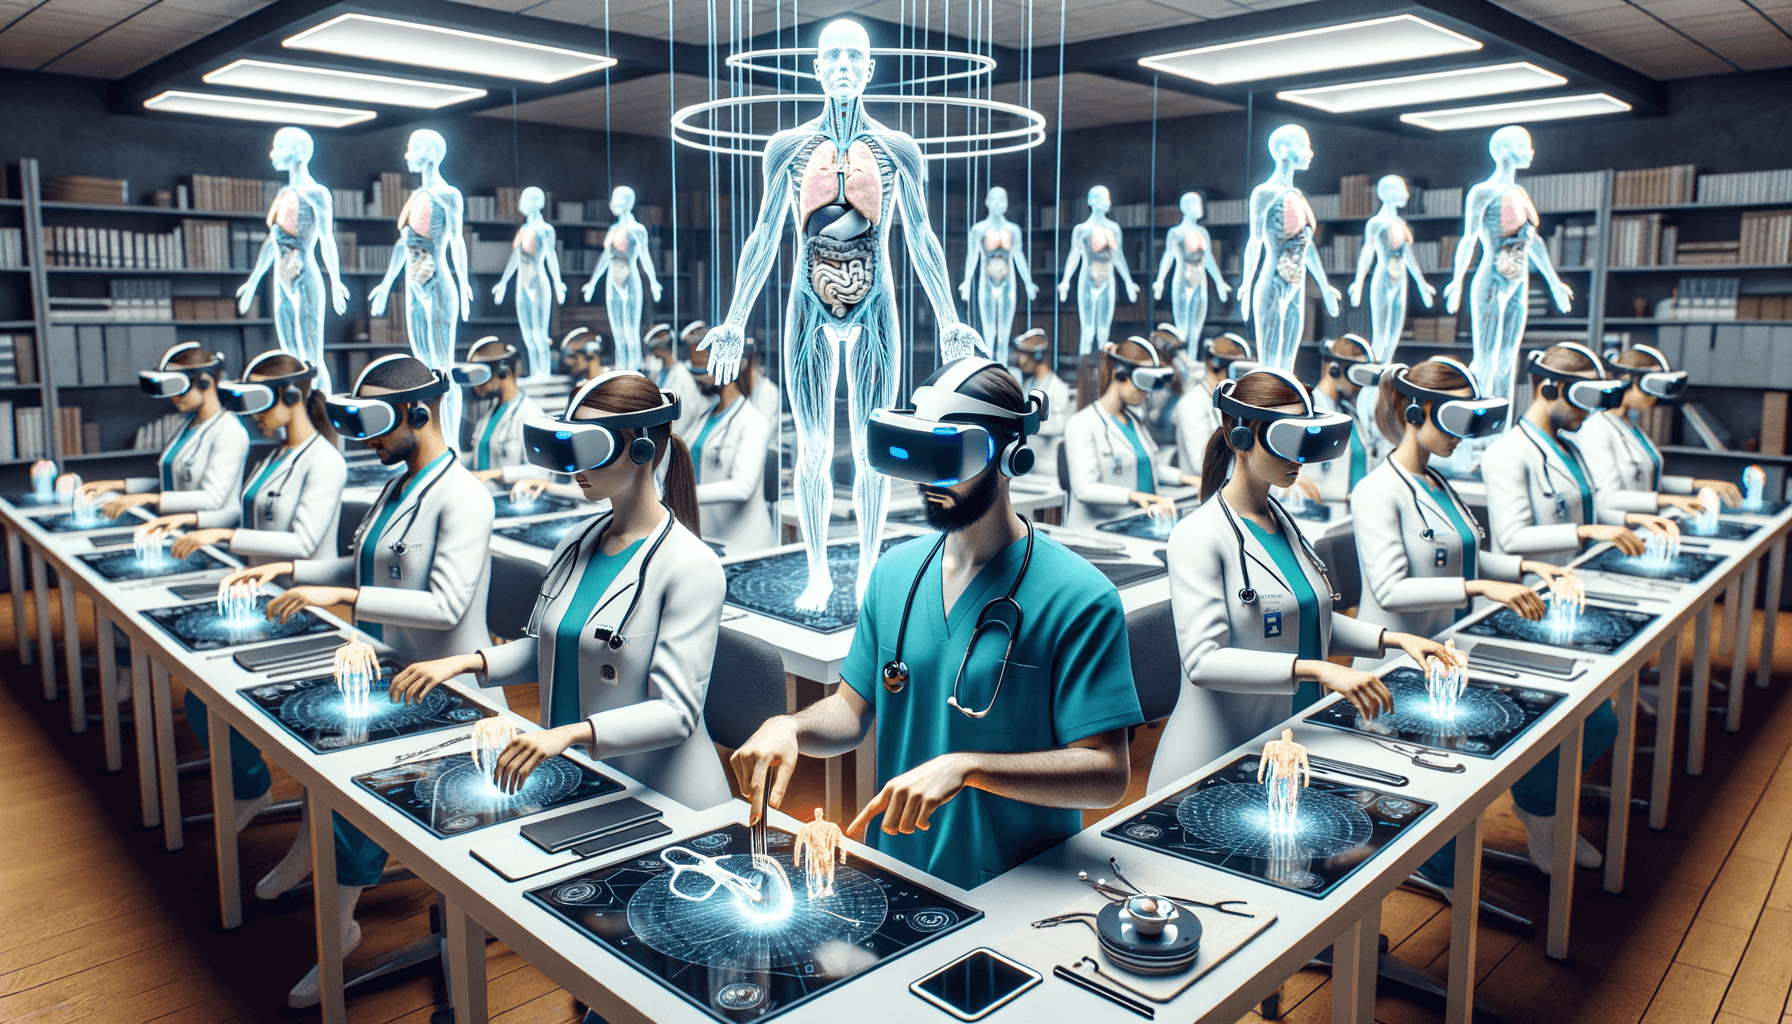 "Exploring AR & VR Innovation in Medical Training: See how Gravity Jack is shaping the future of healthcare education with 3D anatomical visualization and virtual surgical practice, leading to 230% improved performance in procedures. Dive deeper into our transformative portfolio!"